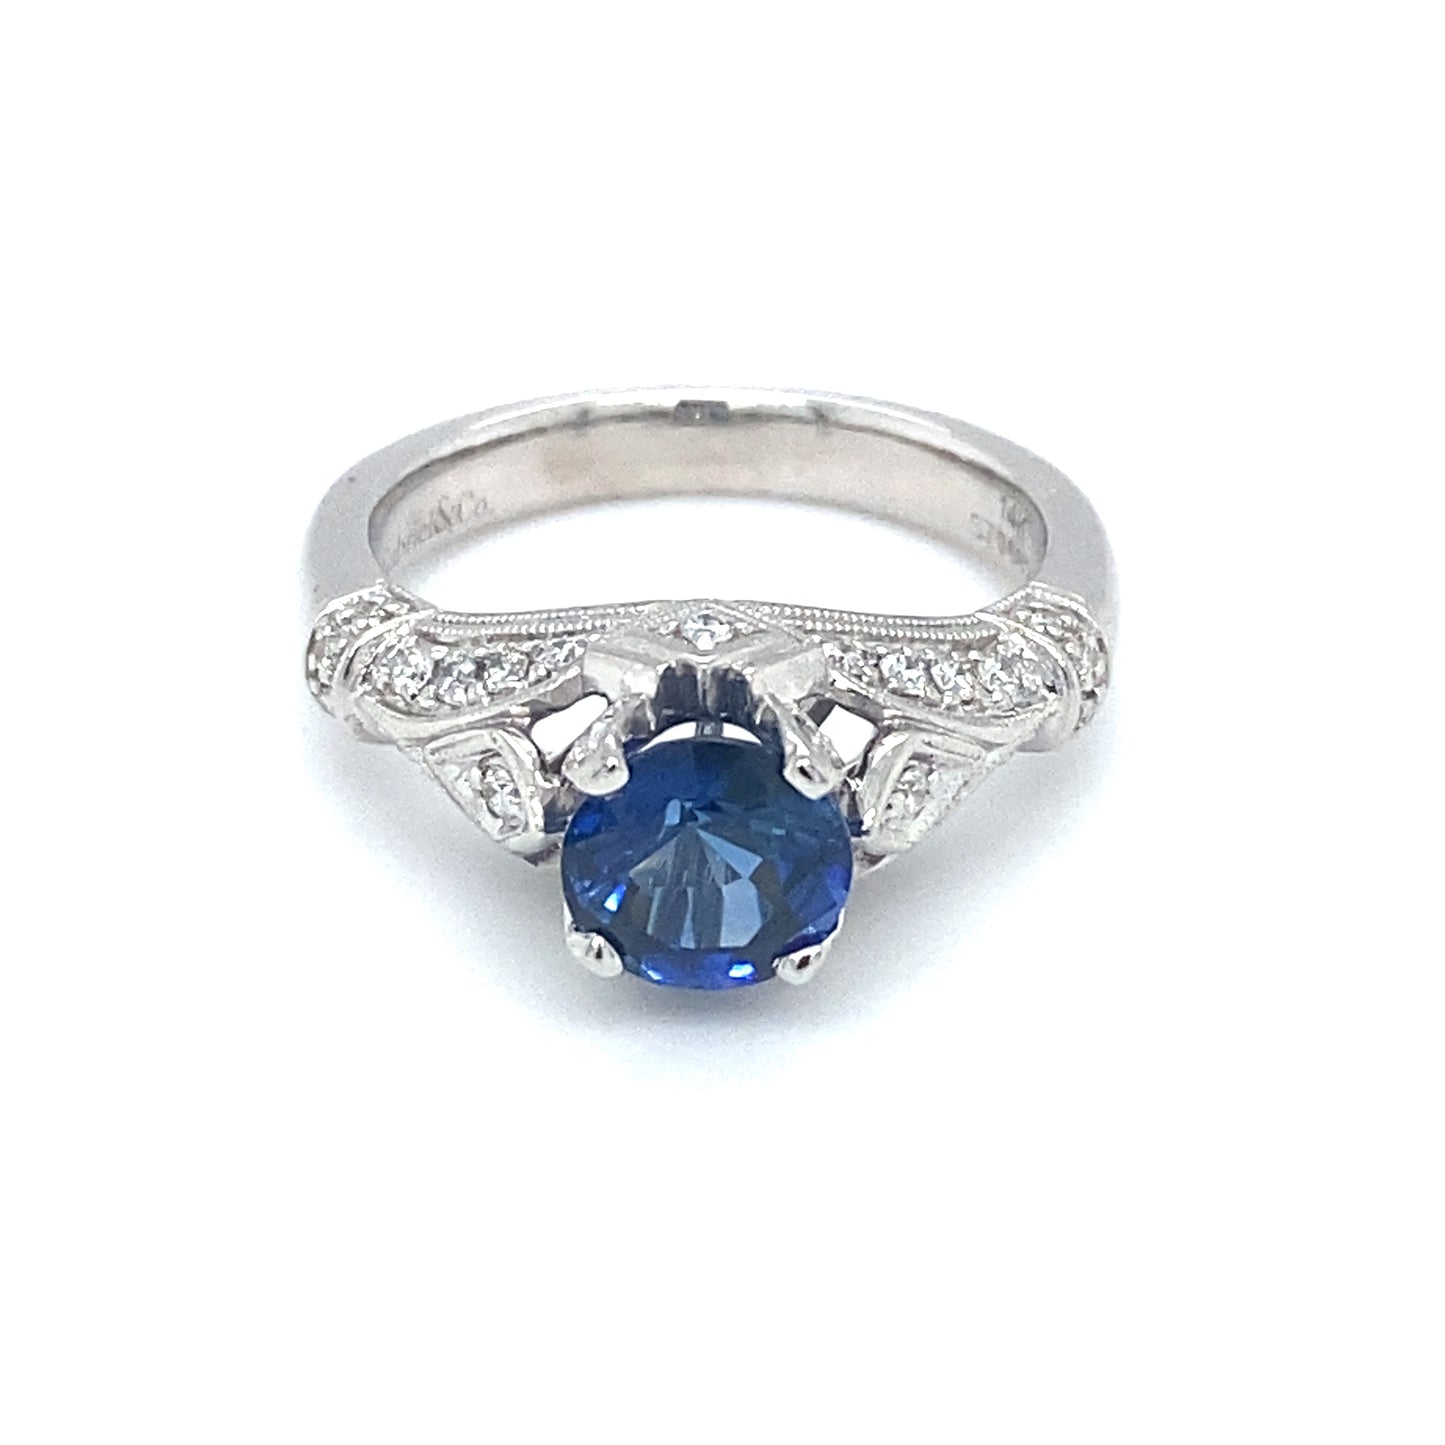 GABRIEL & CO 2.0ct Iolite and Diamond Engagement Ring in 14K White Gold